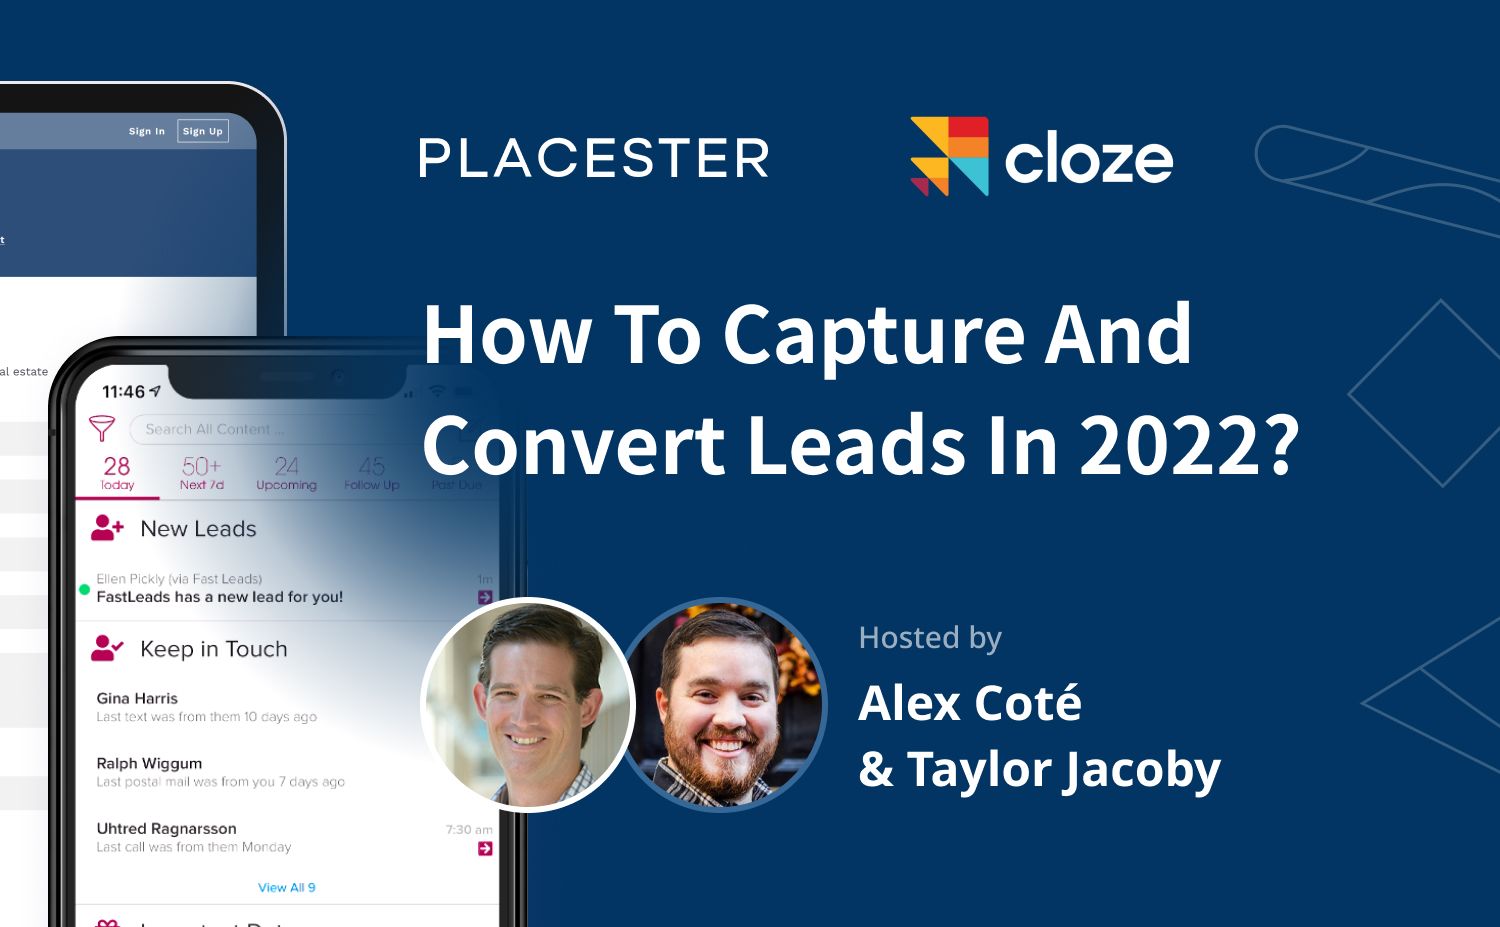 How To Capture And Convert Leads In 2022?